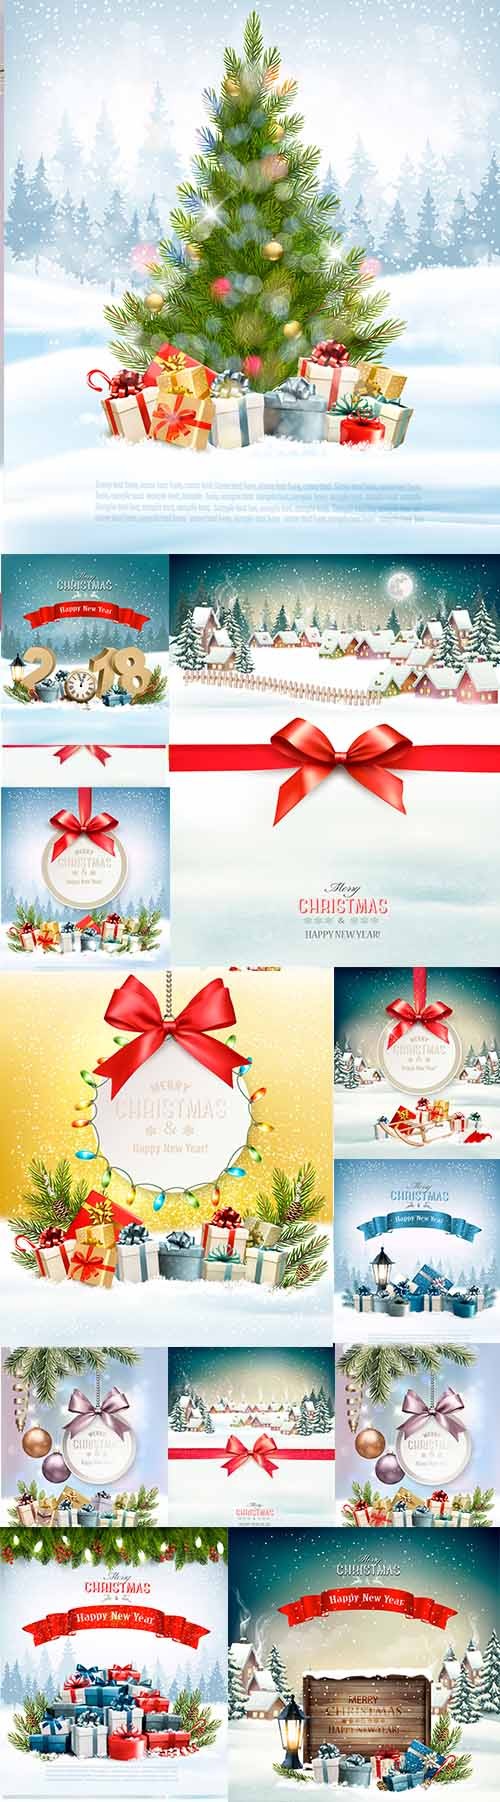 Merry Christmas vector background with branches of tree and colorful gift boxes